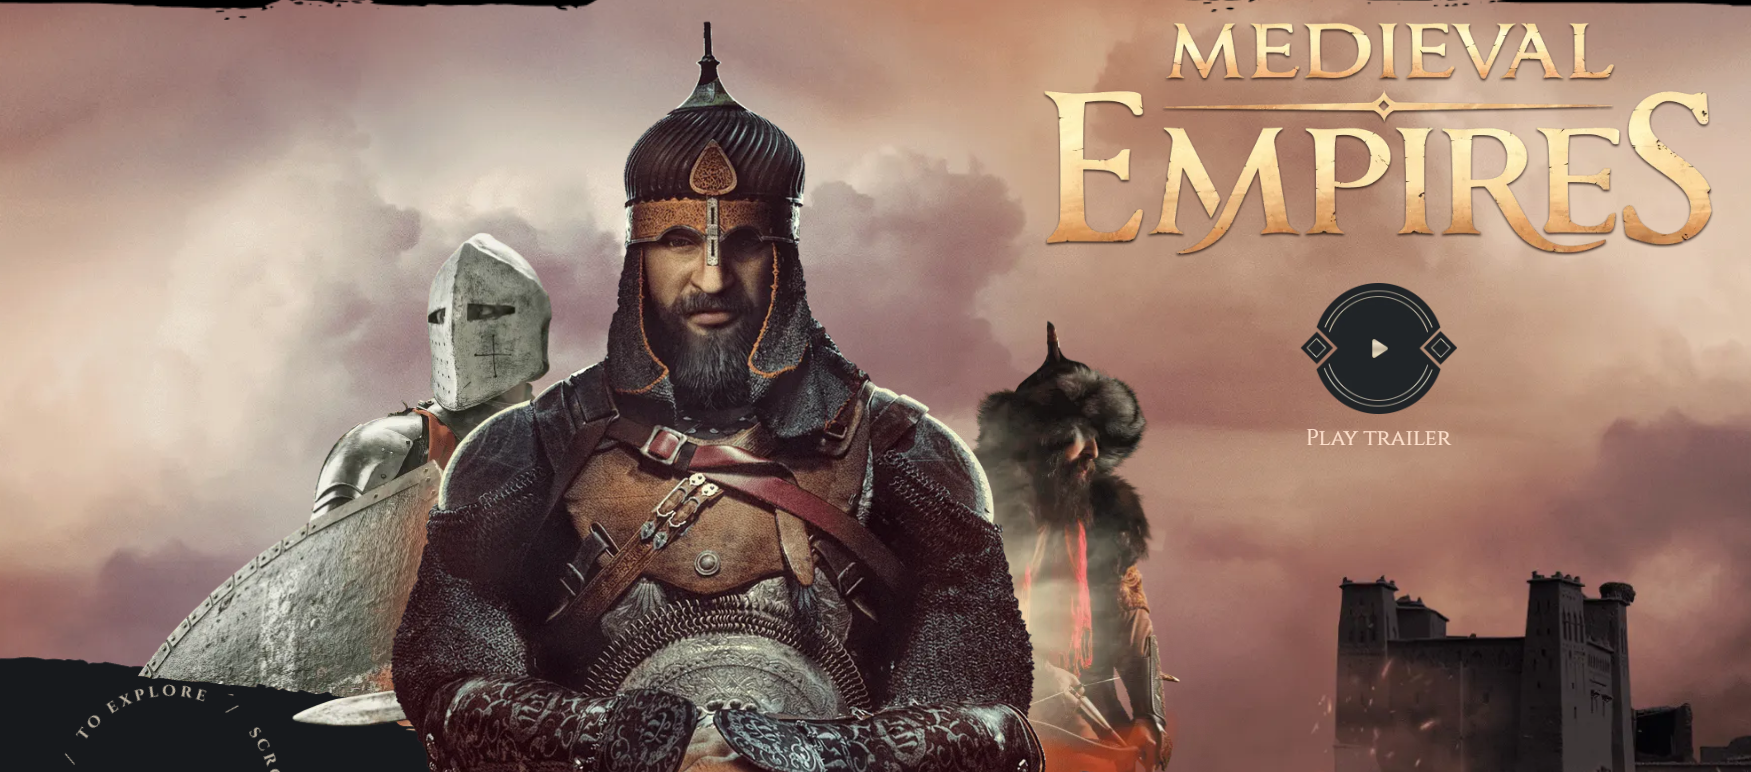 Medieval Empires game's upcoming MEE token launch on Bybit has led to crypto influencers clashing on Twitter